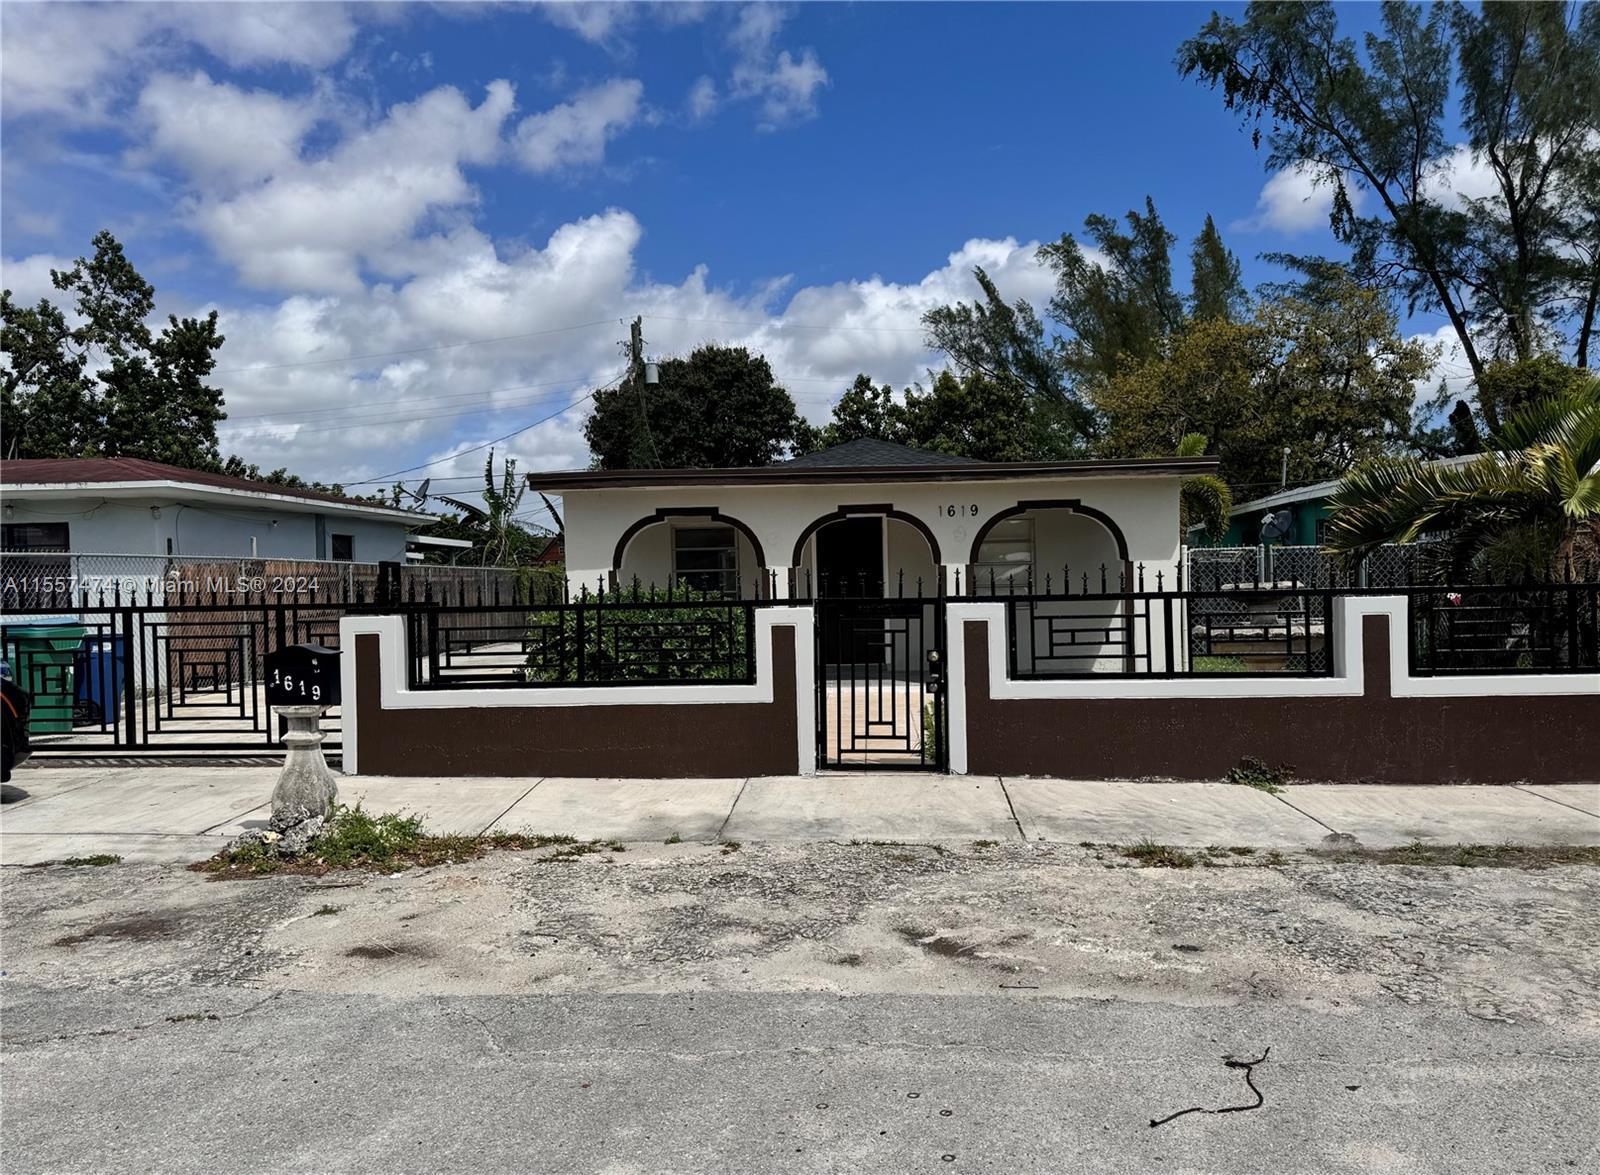 Photo of 1619 NW 112th St in Miami, FL